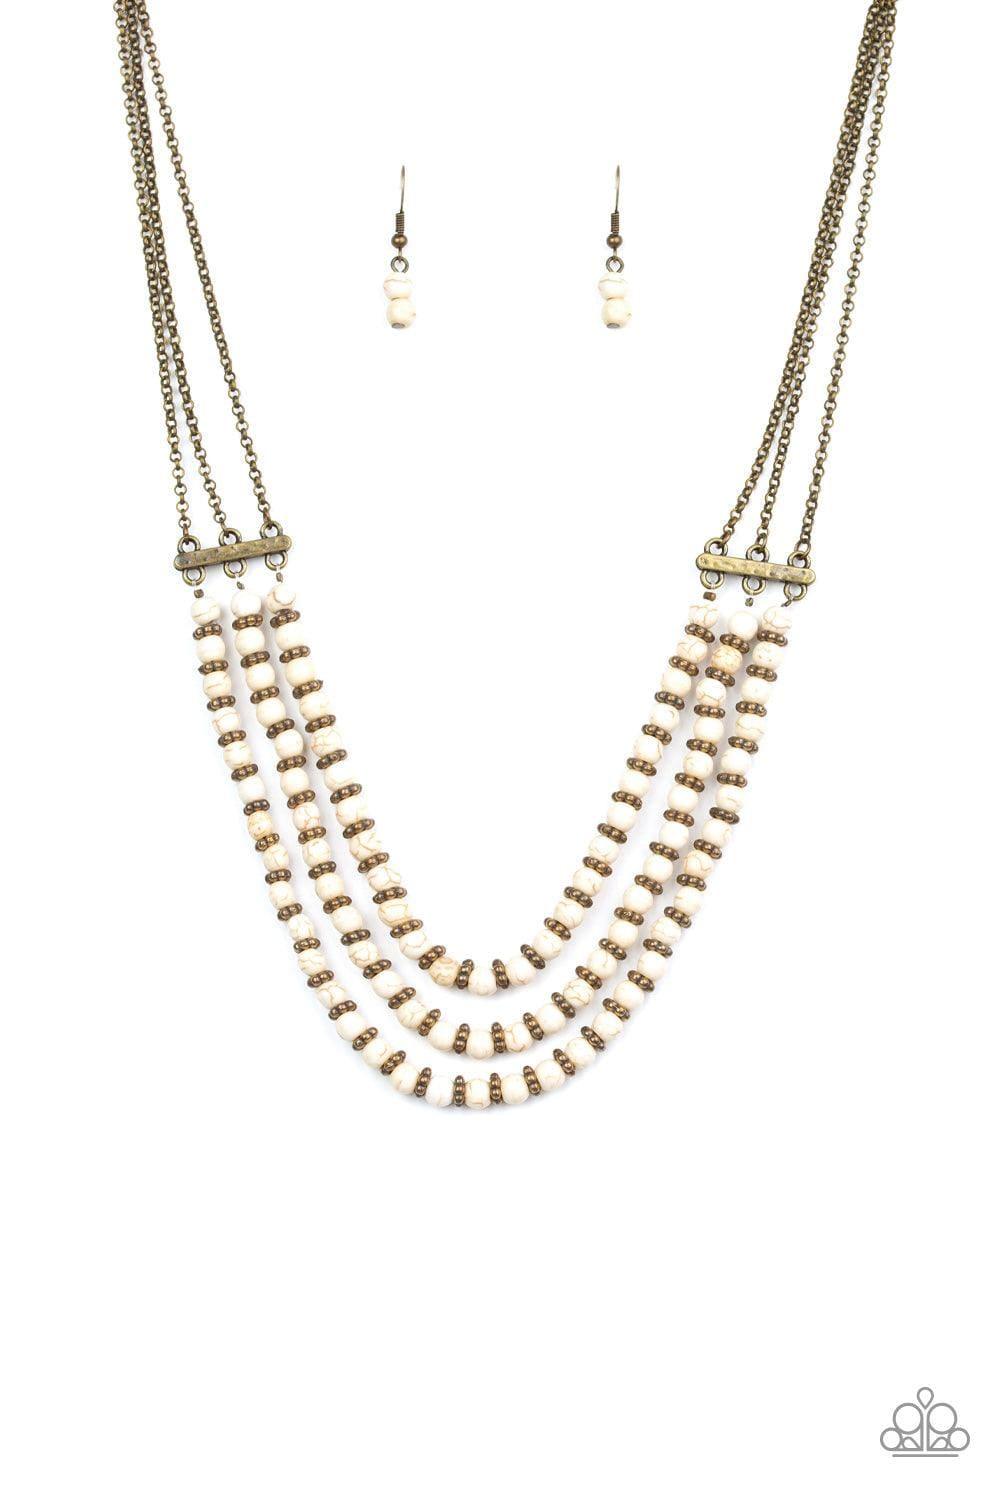 Paparazzi Accessories - Terra Trails - White Necklace - Bling by JessieK